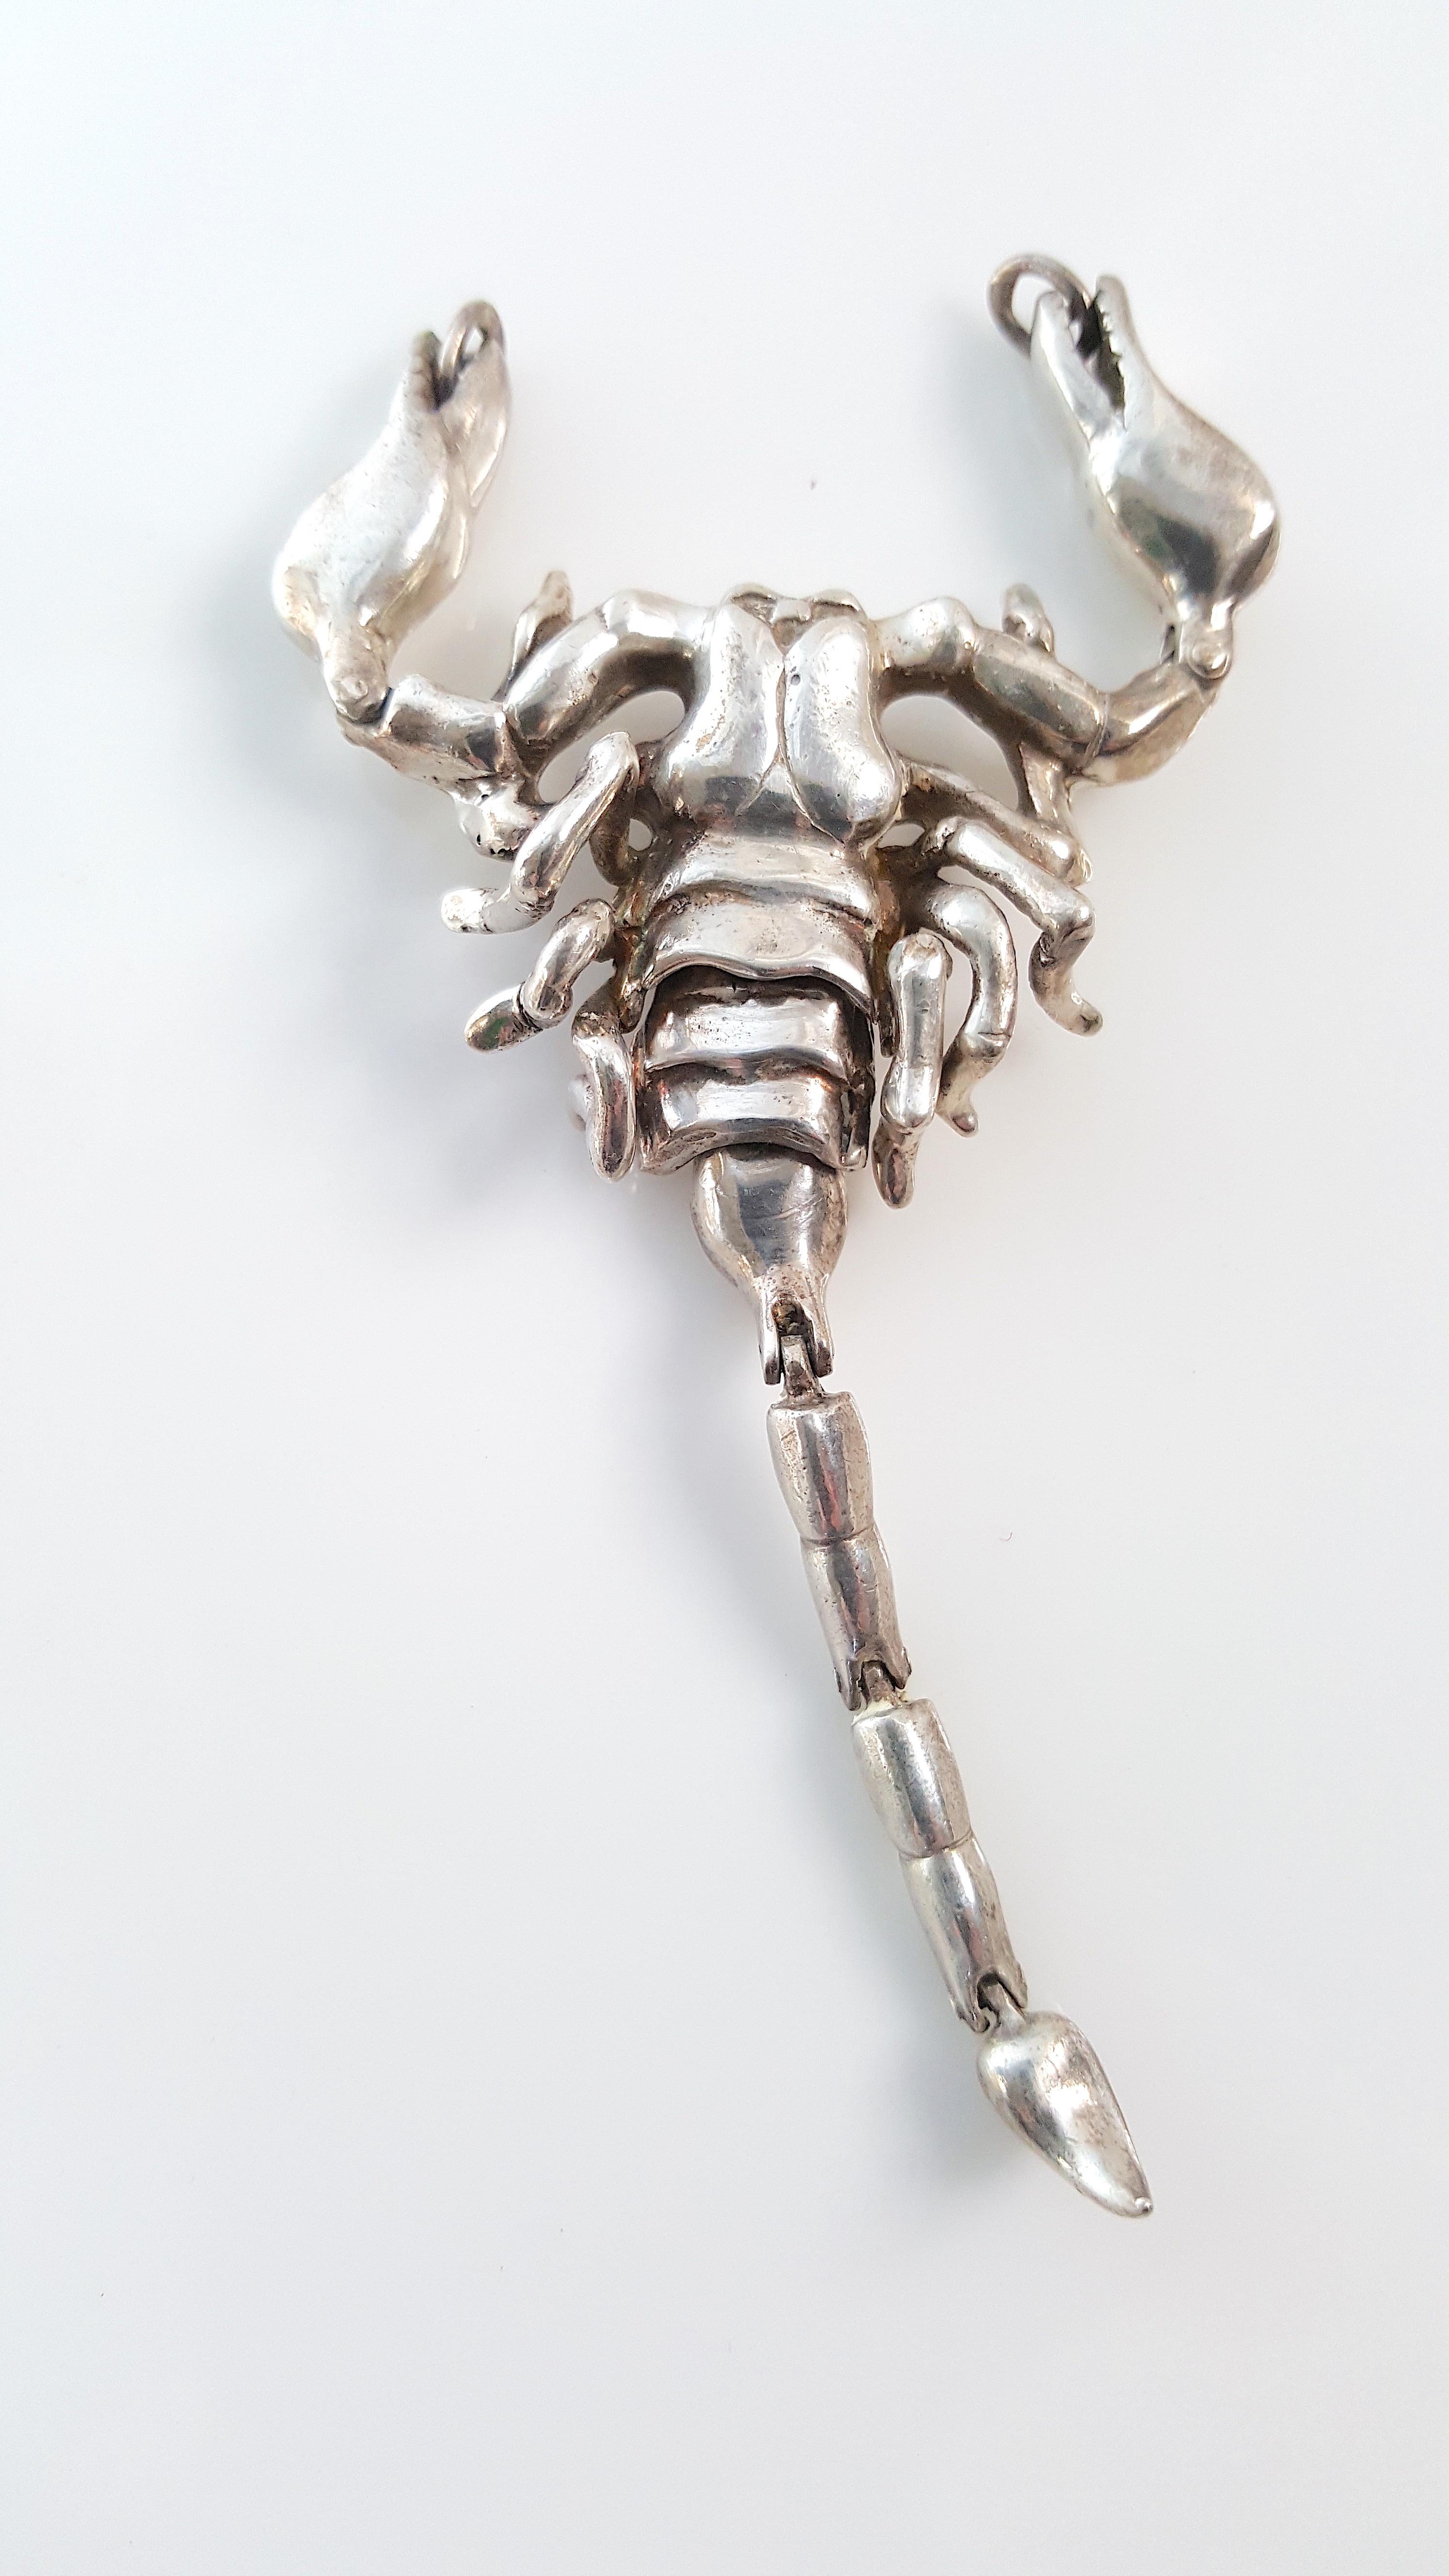 Italian-Riviera goldsmith Ugo Cacciatori, while he worked from his coastal studio on the Cinque Terra, designed this signed one-of-a-kind kinetic zodiac scorpion sterling-silver pendant in 2002. During the early 2000s, he was creating runway pieces